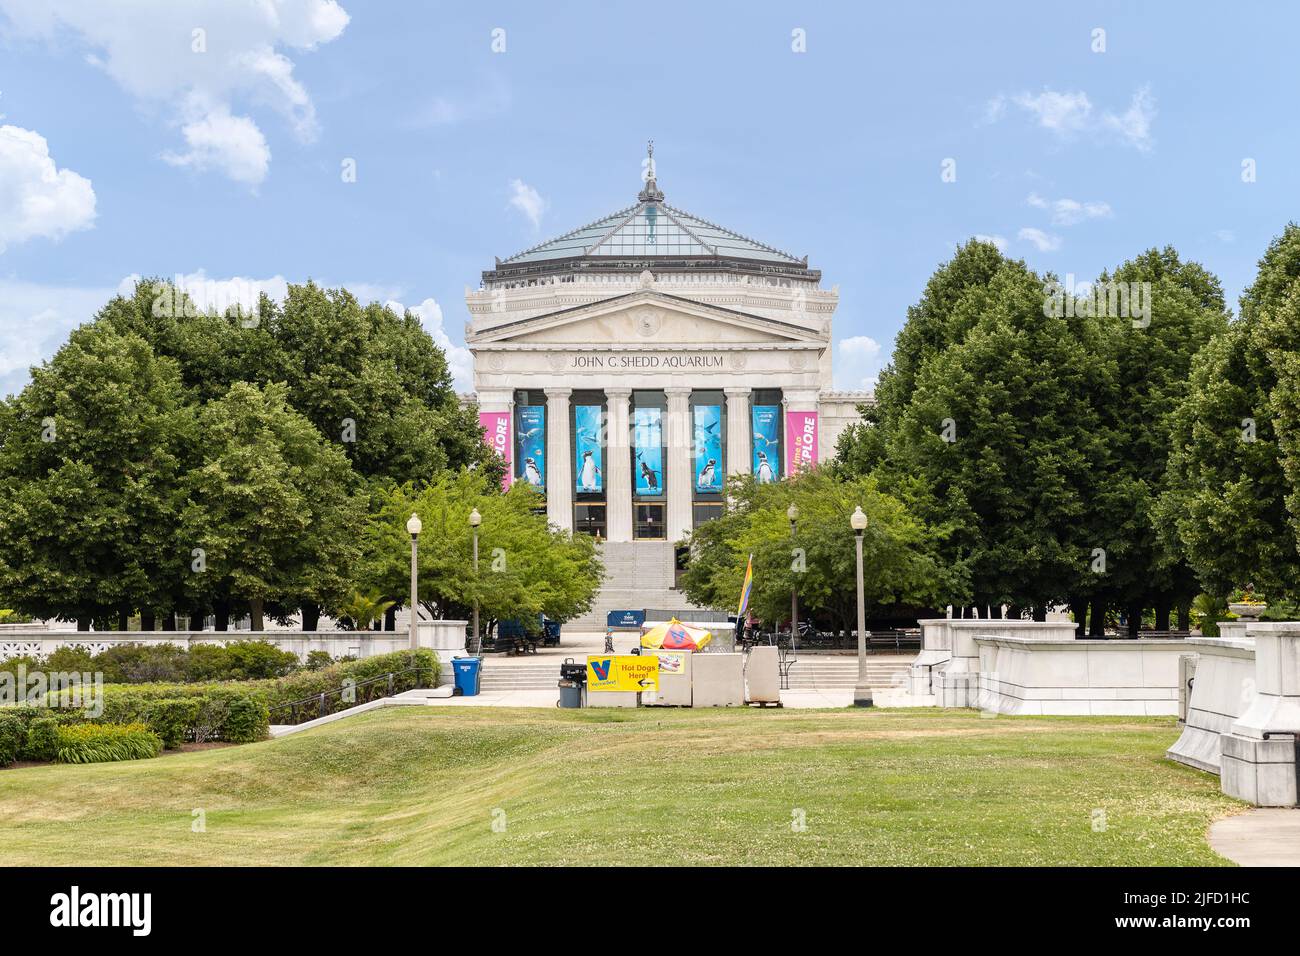 The Shedd Aquarium is located in the Museum Campus in downtown Chicago and next to Lake Michigan. Stock Photo